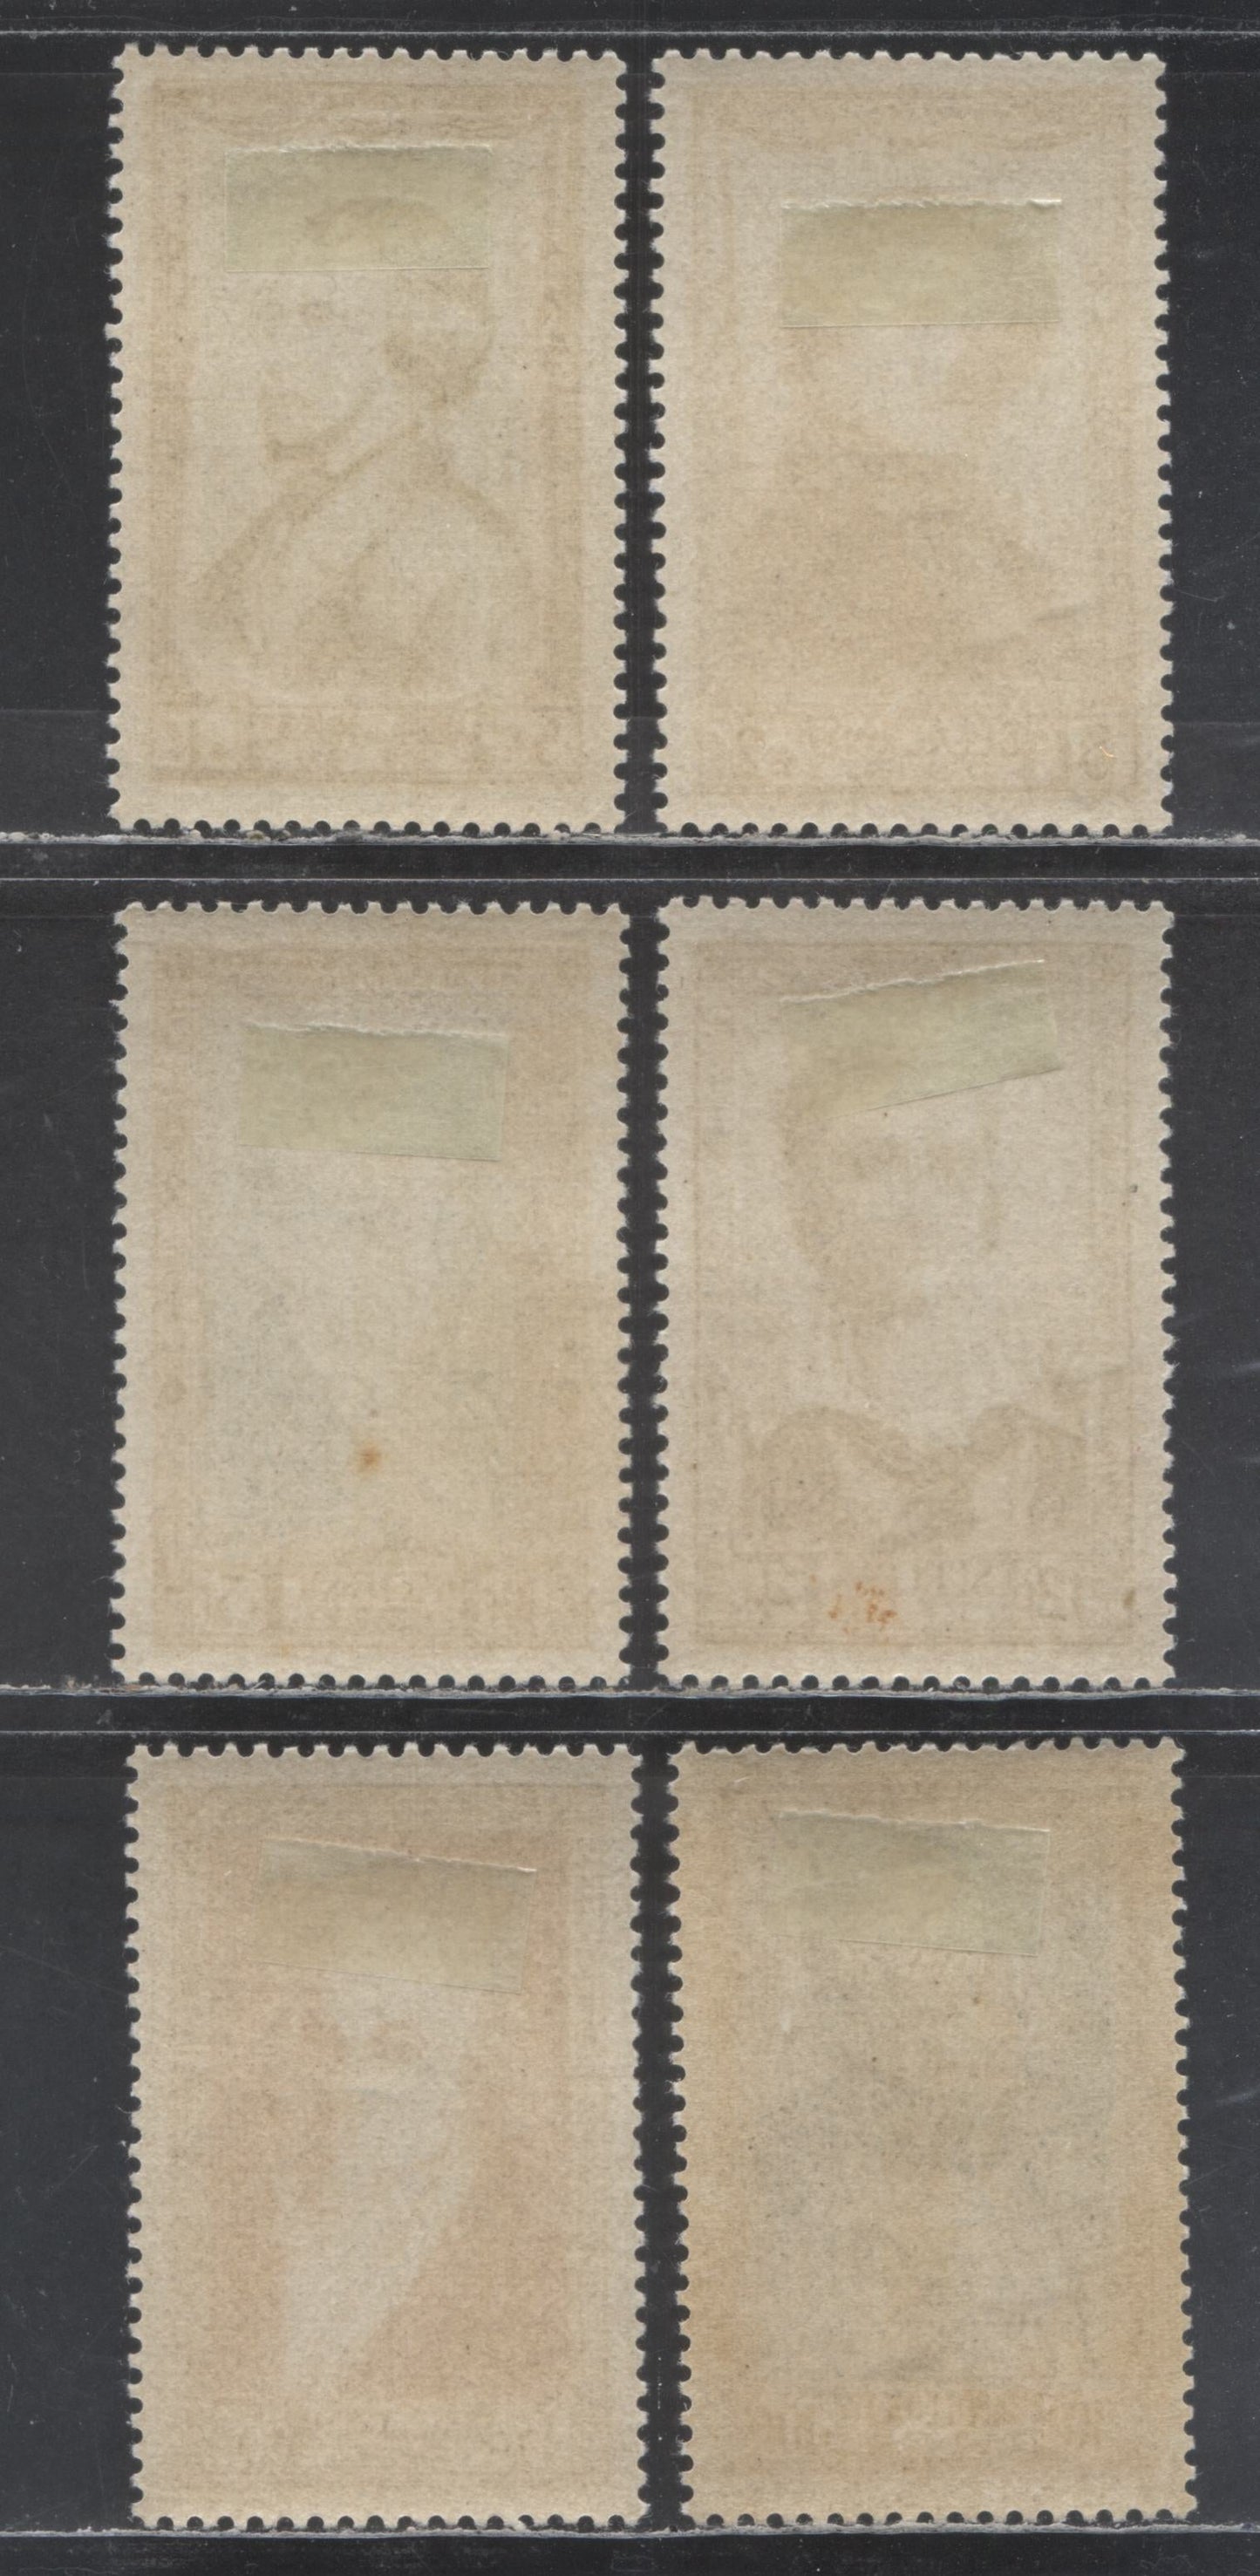 Lot 423 France SC#B258-B263 1951 Semi Postals, 6 VFOG Singles, Click on Listing to See ALL Pictures, Estimated Value $27